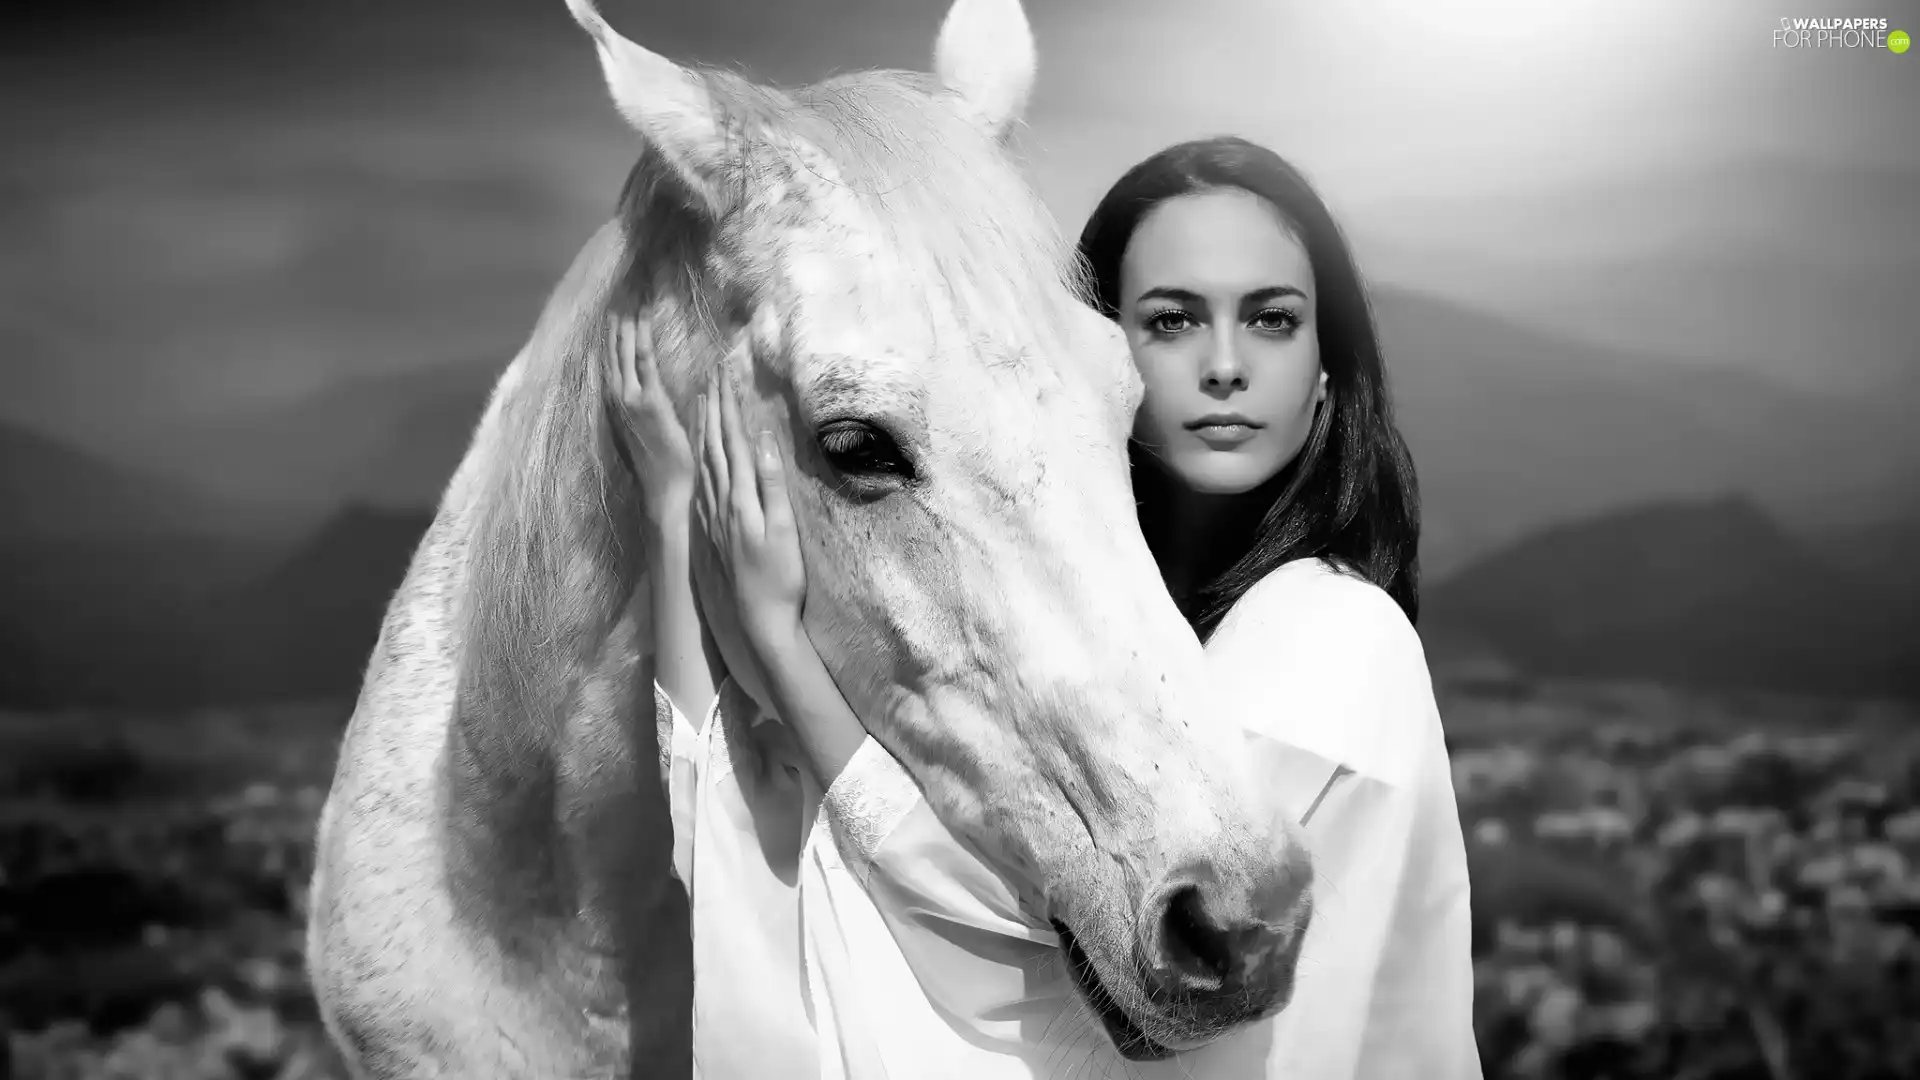 Black And White Women Horse For Phone Wallpapers 1920x1080